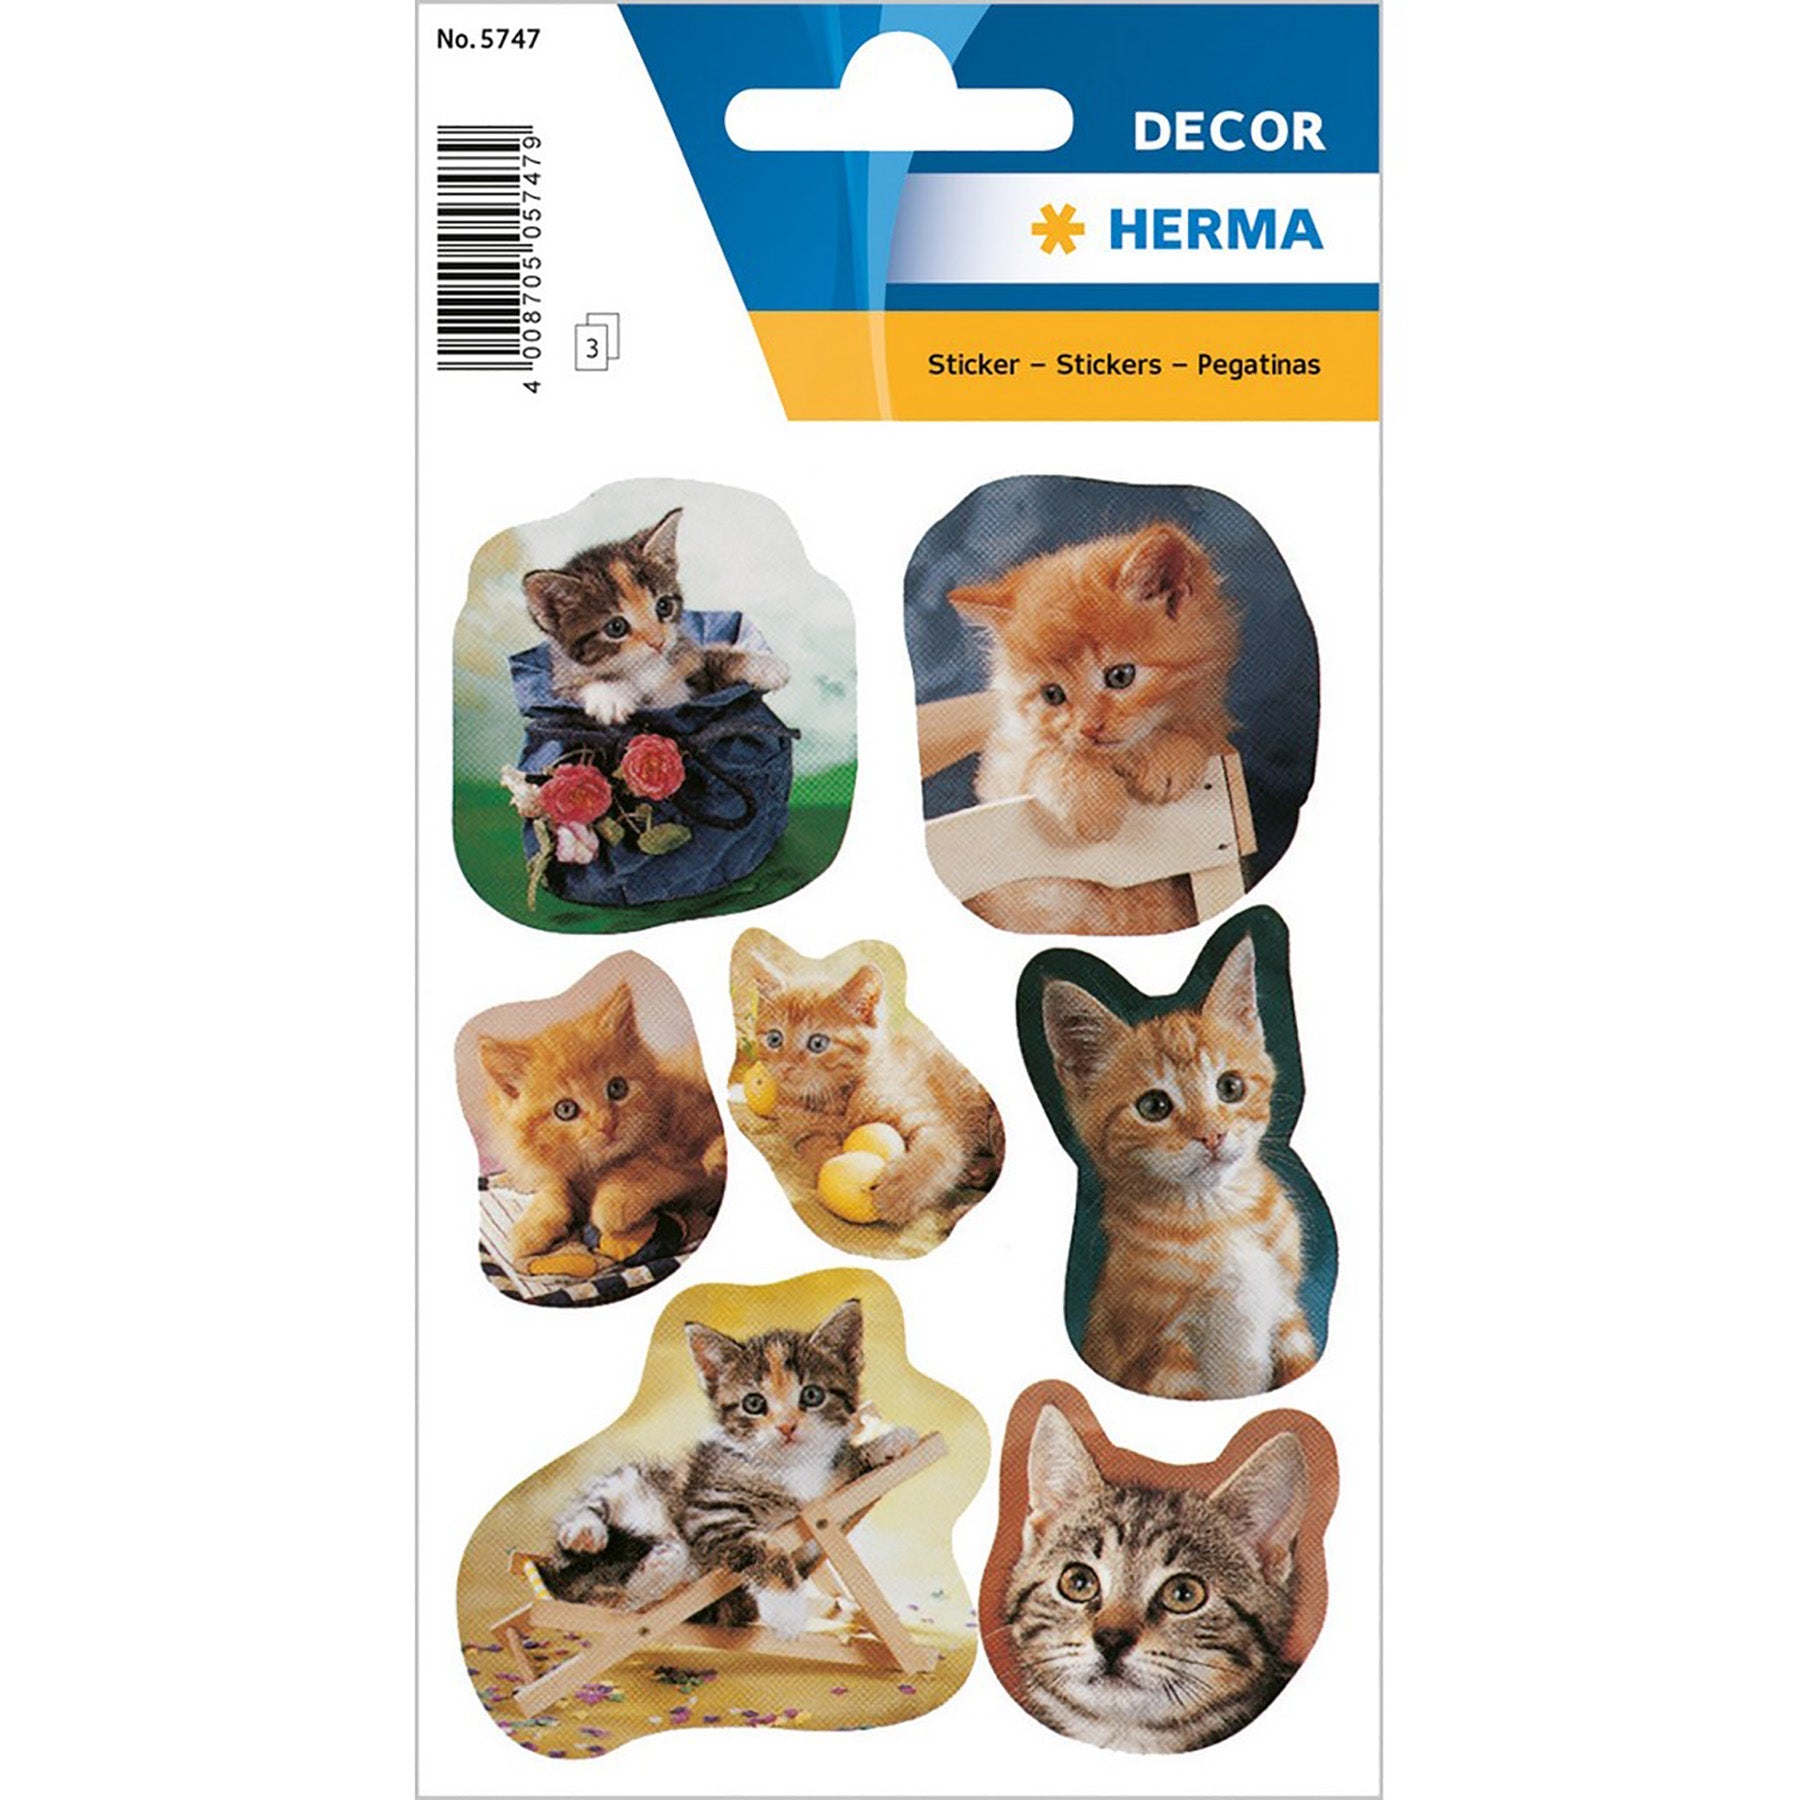 Herma Decor 3 Sheets Stickers Little Cats 4.75x3.1in Sheet 